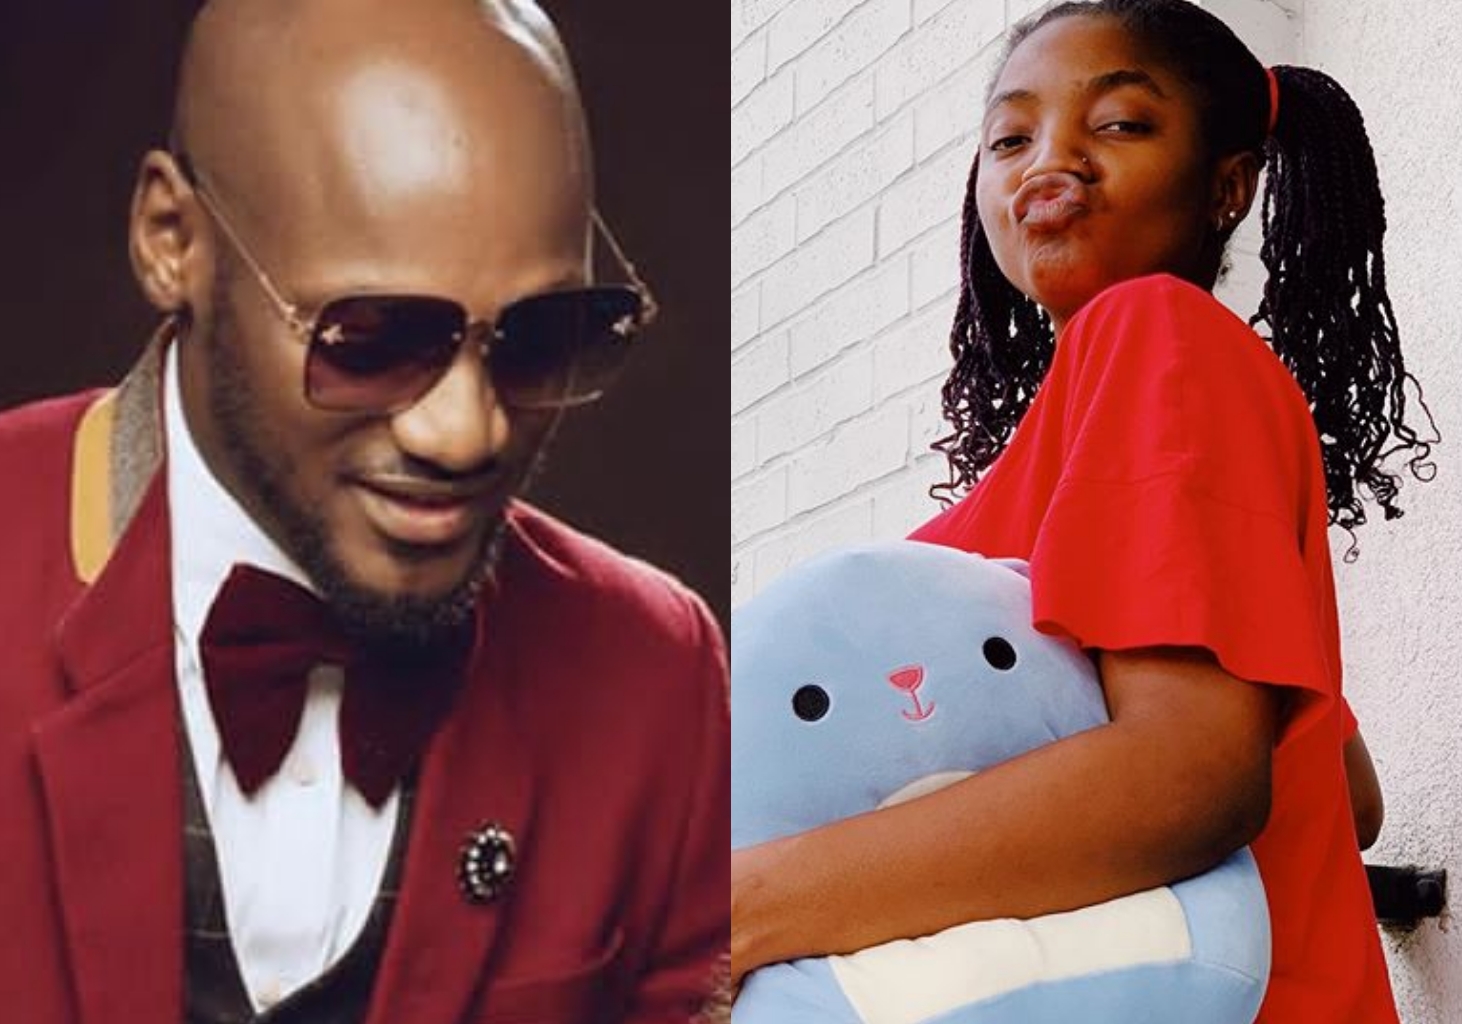 "Simply simi, I can't shout" – 2face Idibia applauds Simi's talent in Duduke (Video)